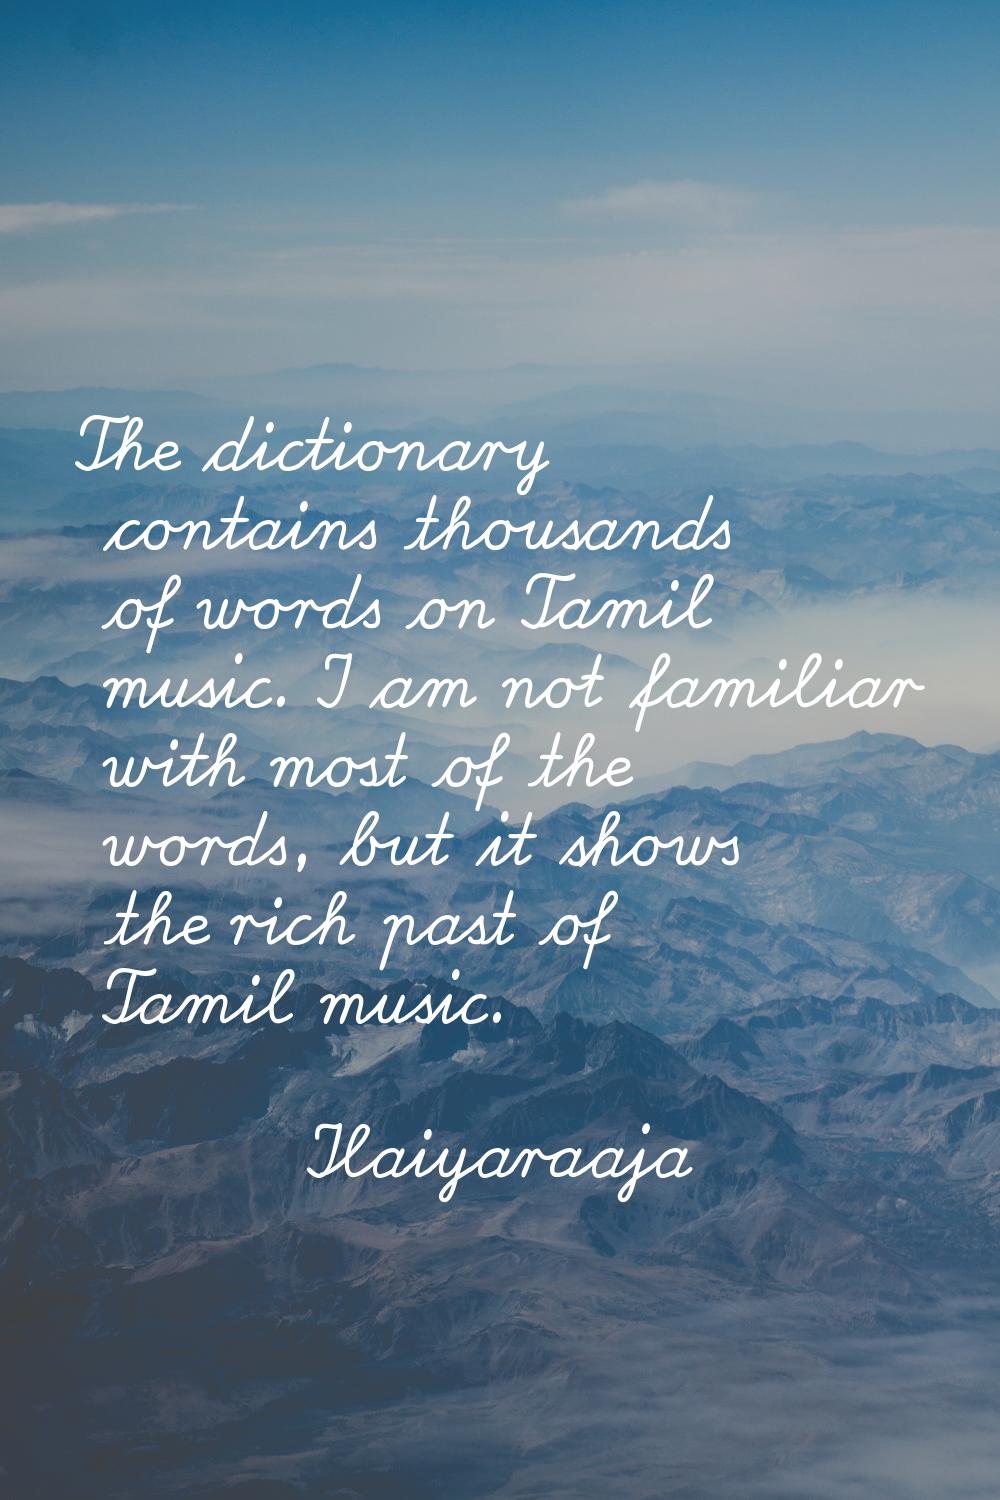 The dictionary contains thousands of words on Tamil music. I am not familiar with most of the words